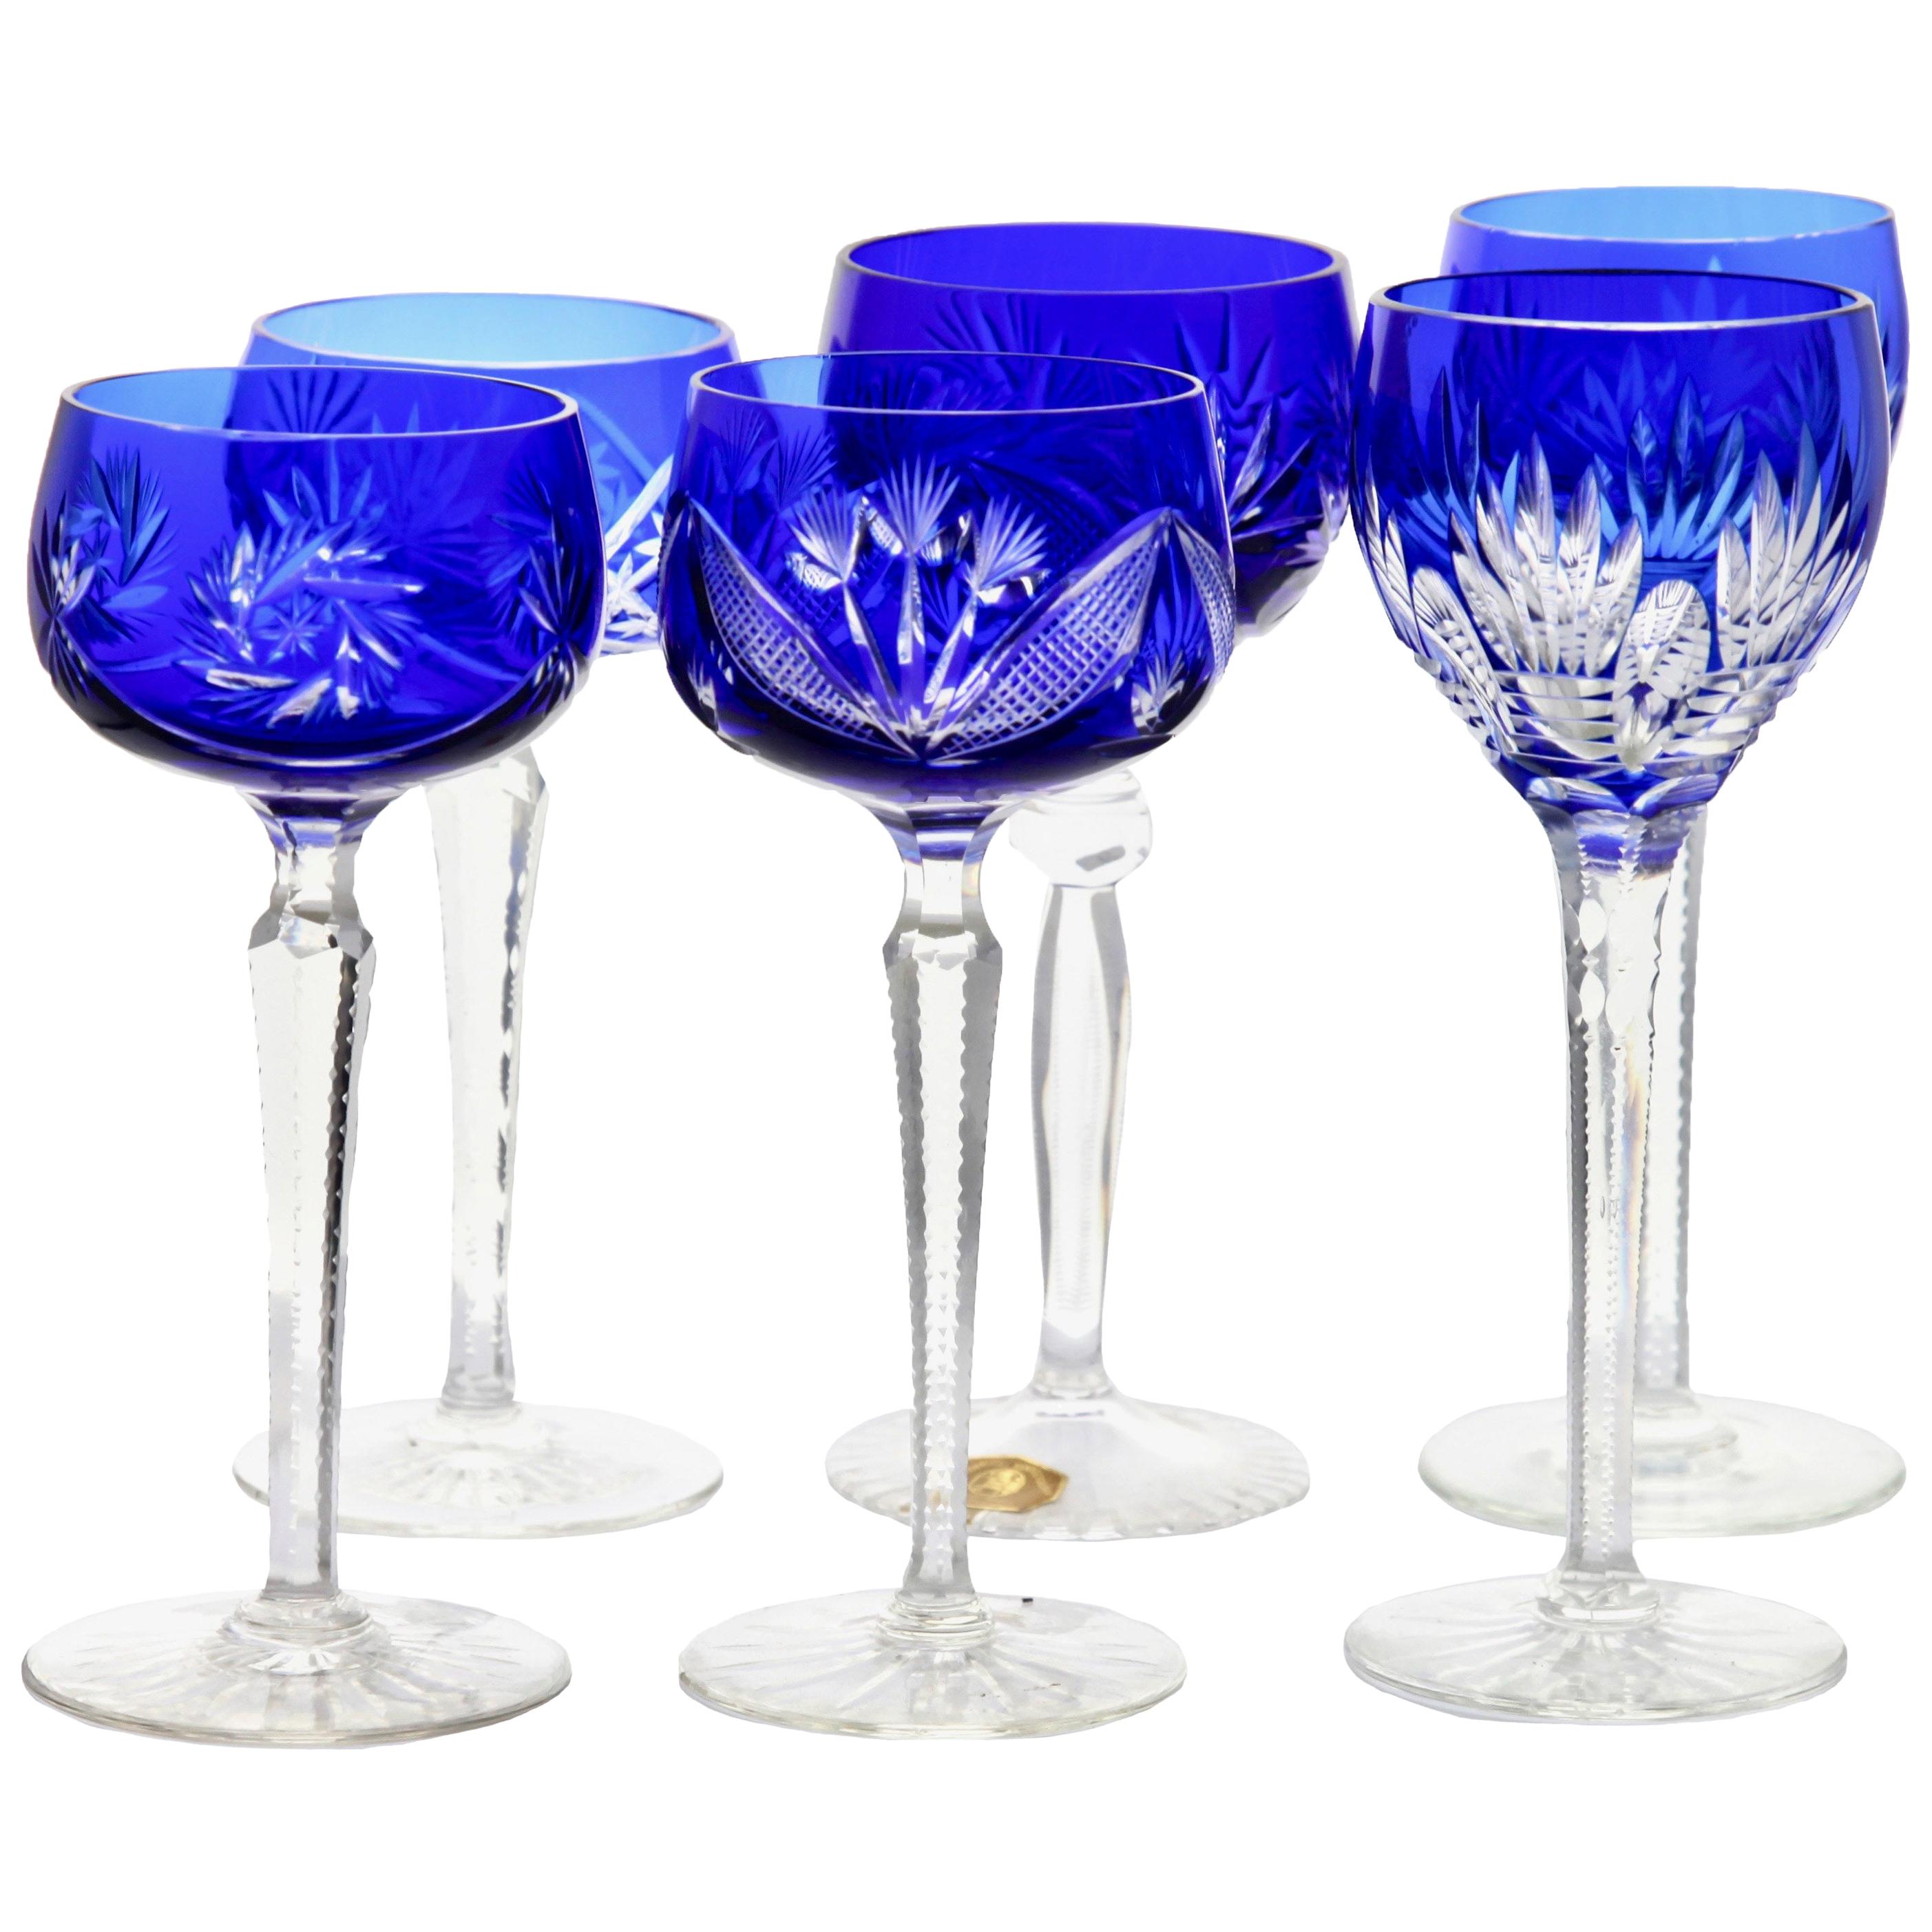 Set of 6 Mixed Stem Glasses Cobalt Blue with Colored Overlay Cut to Clear